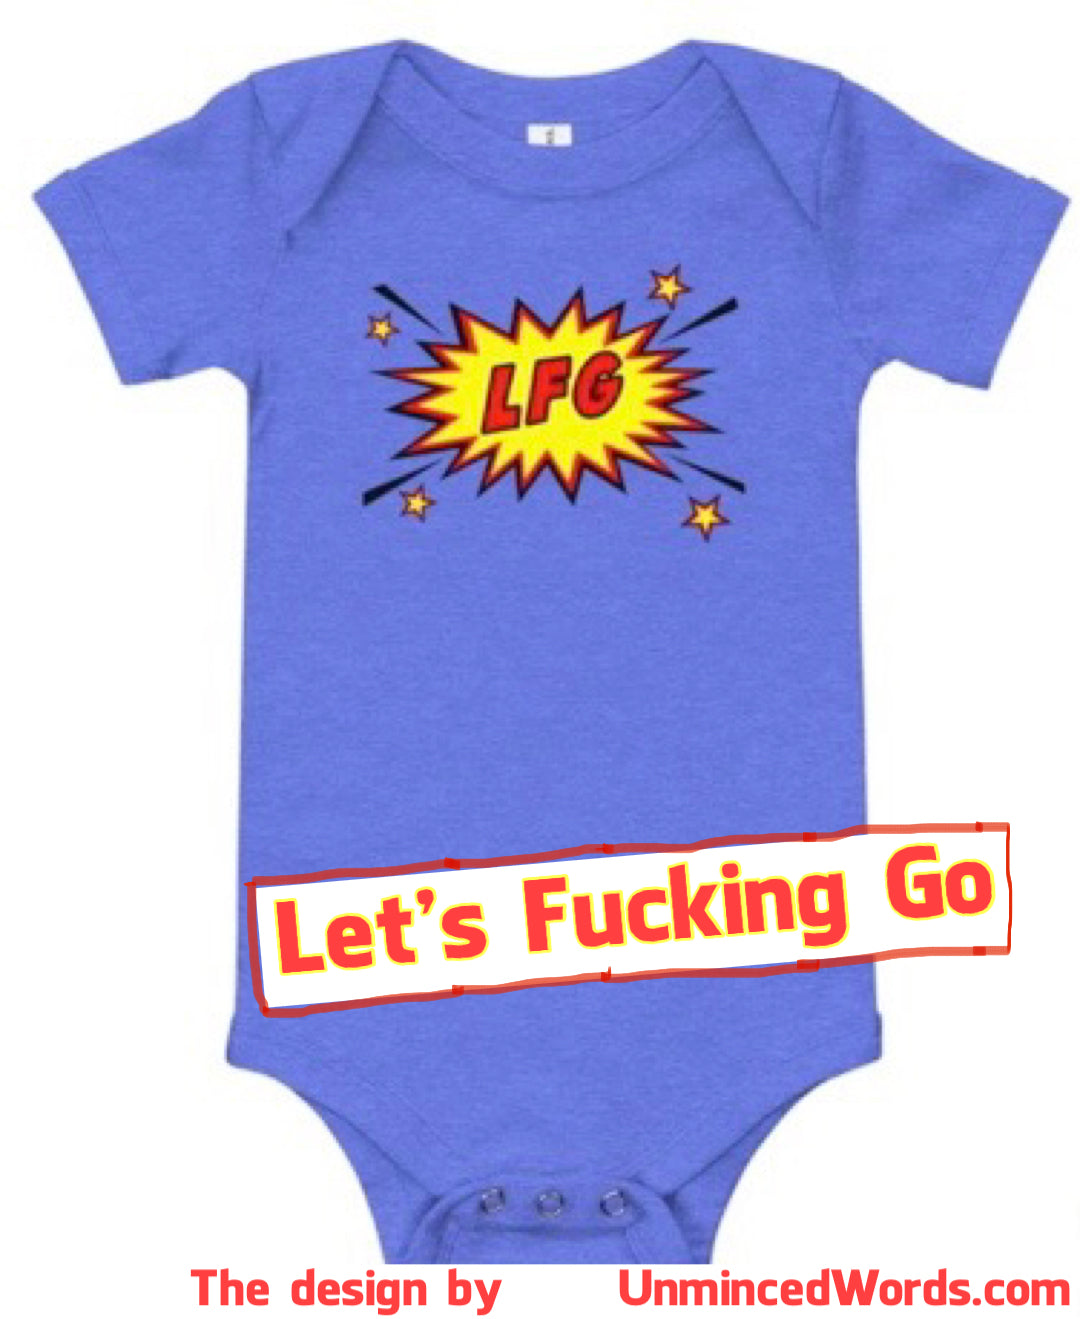 This baby says “Let’s F**king Go!